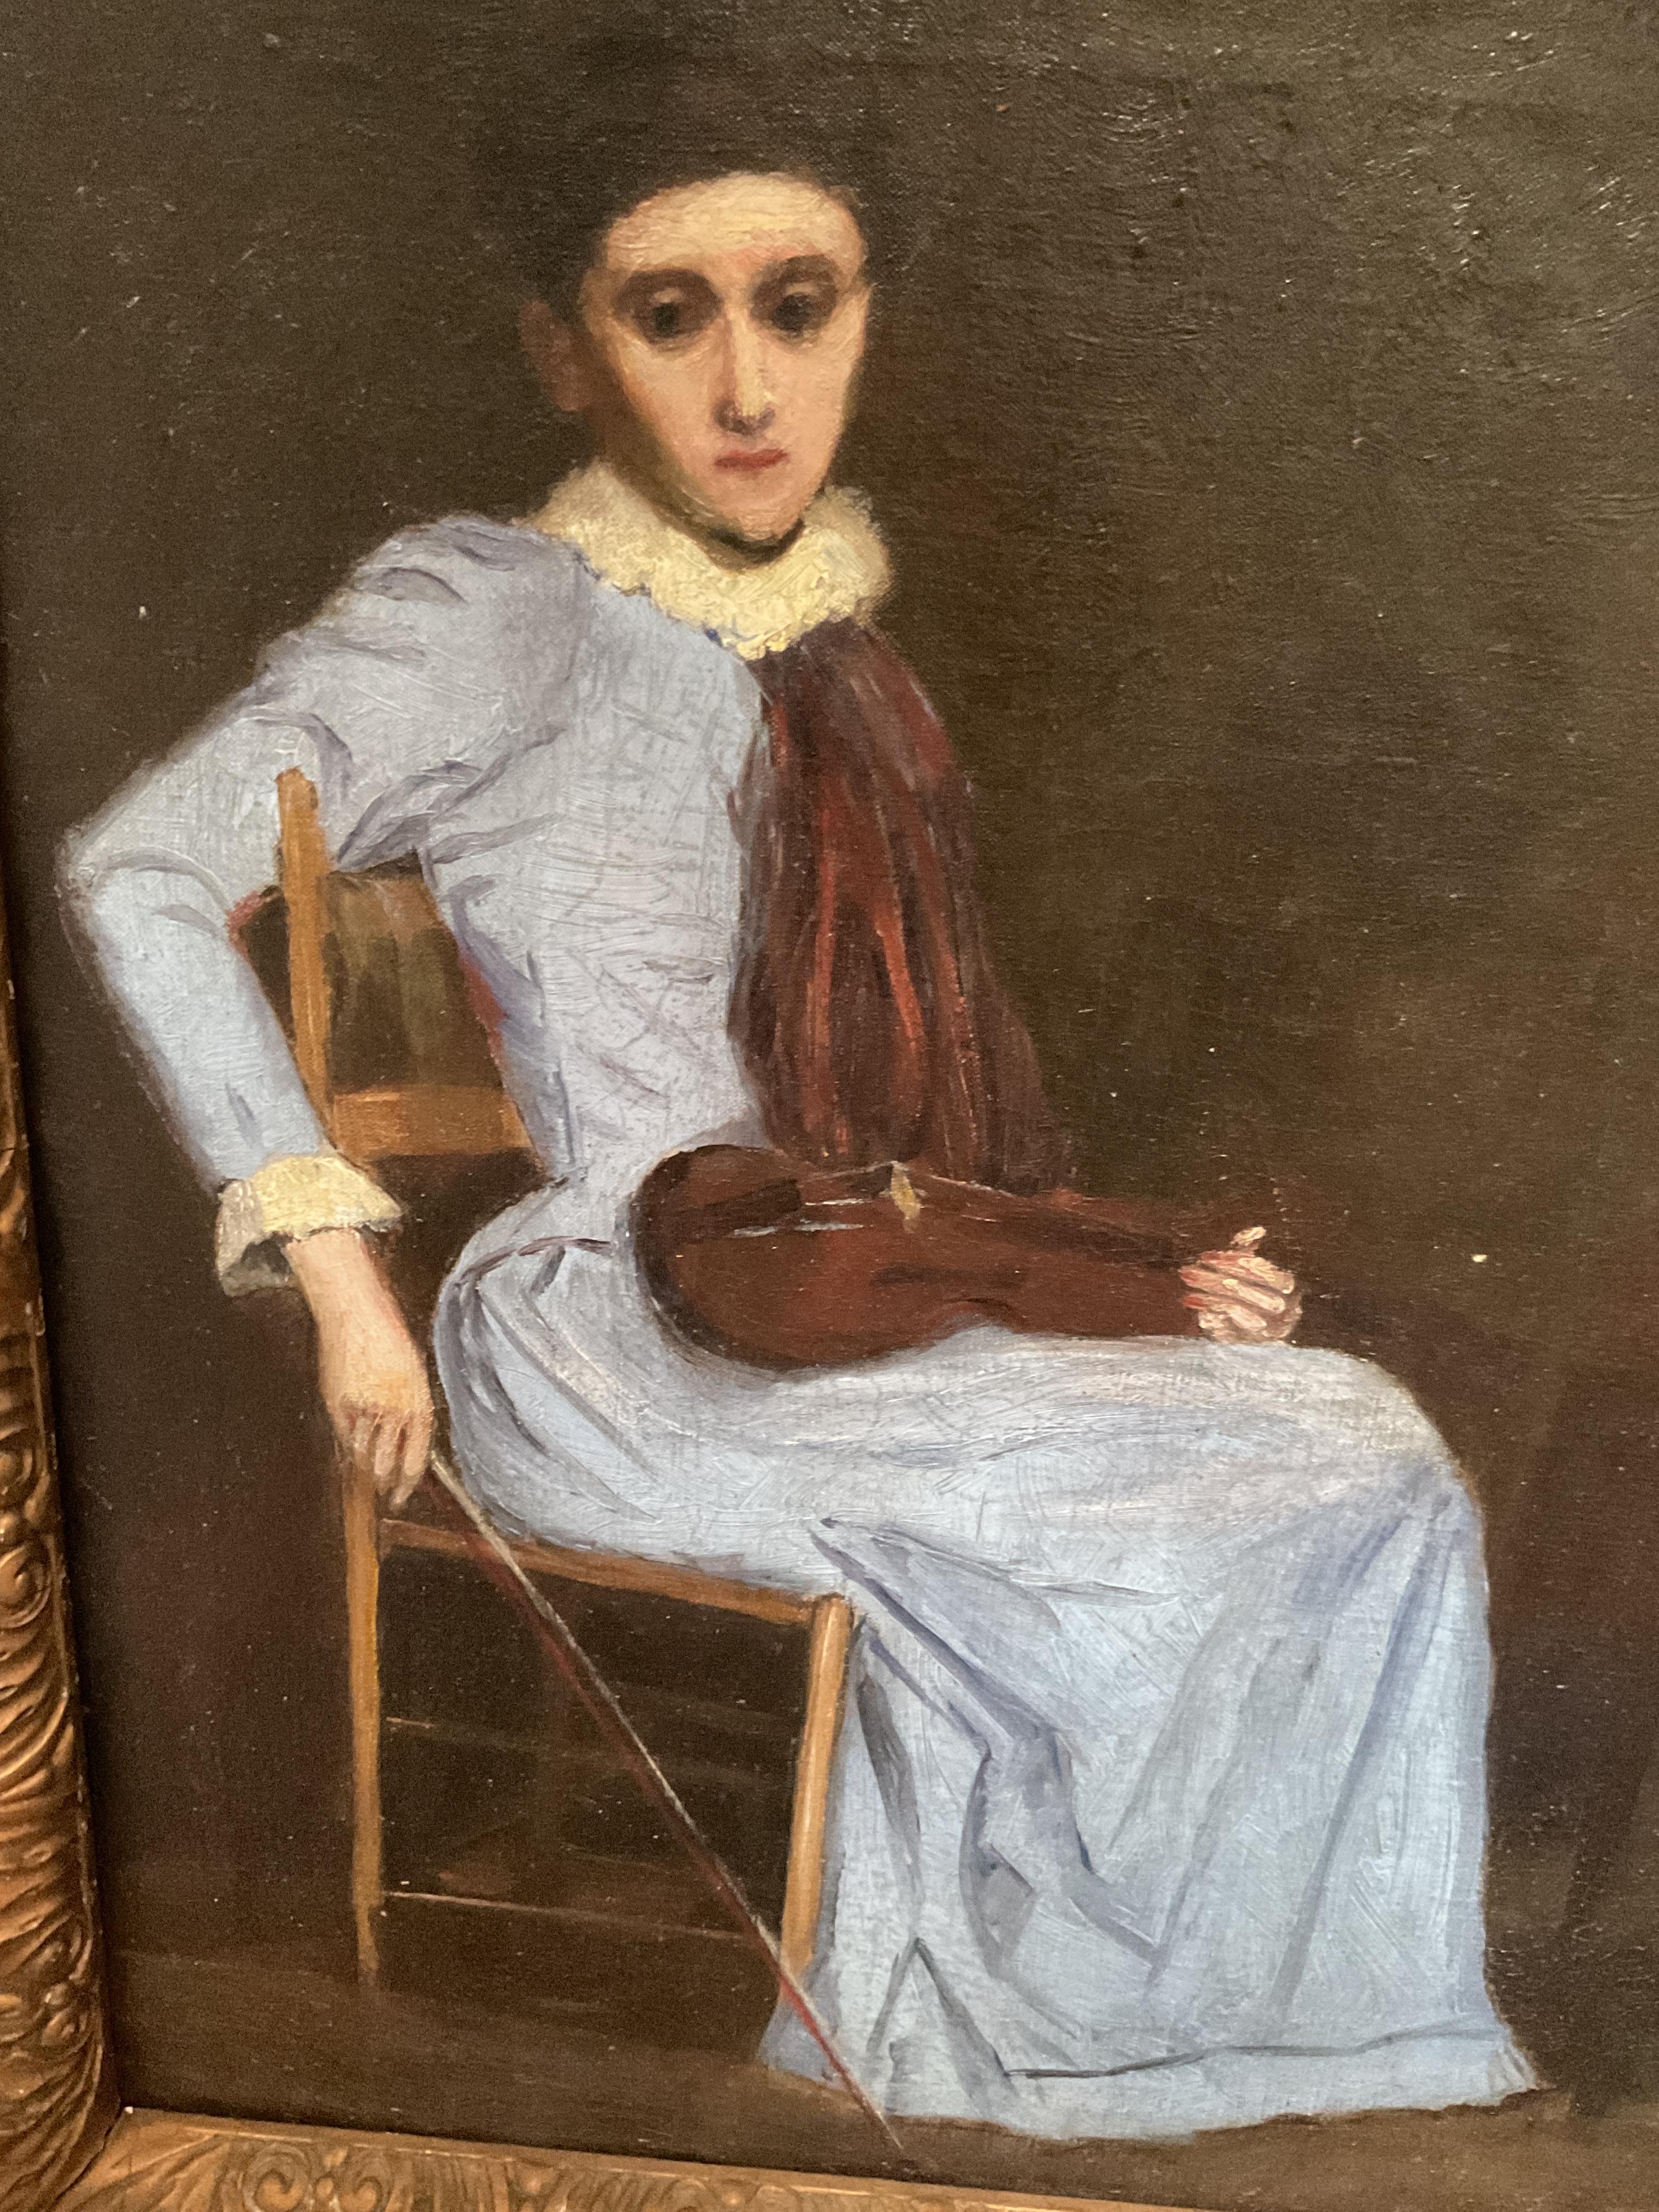 Although unsigned, this is a very well executed portrait of a violin player seated in a hushed setting. It is surely Boston School in style and dating to the very end of the 19th century. The woman, portrayed in a somewhat melancholy manner, rests